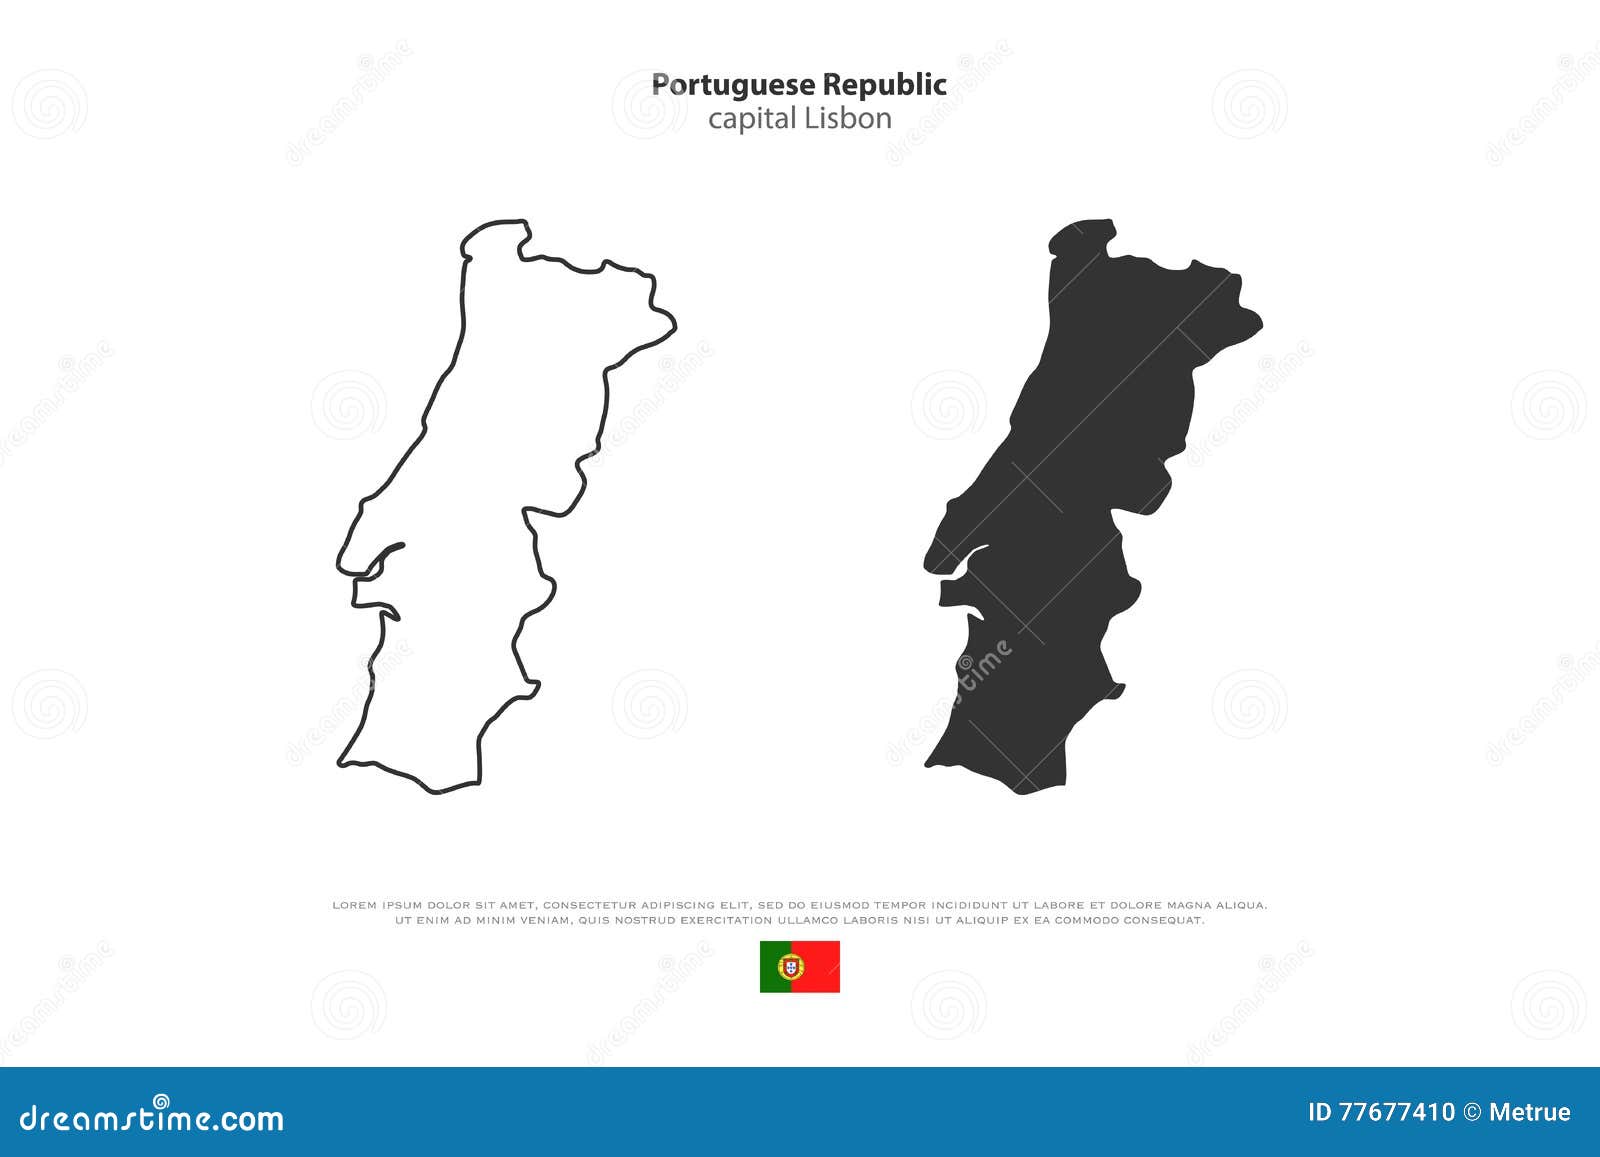 Portugal - Free maps and location icons